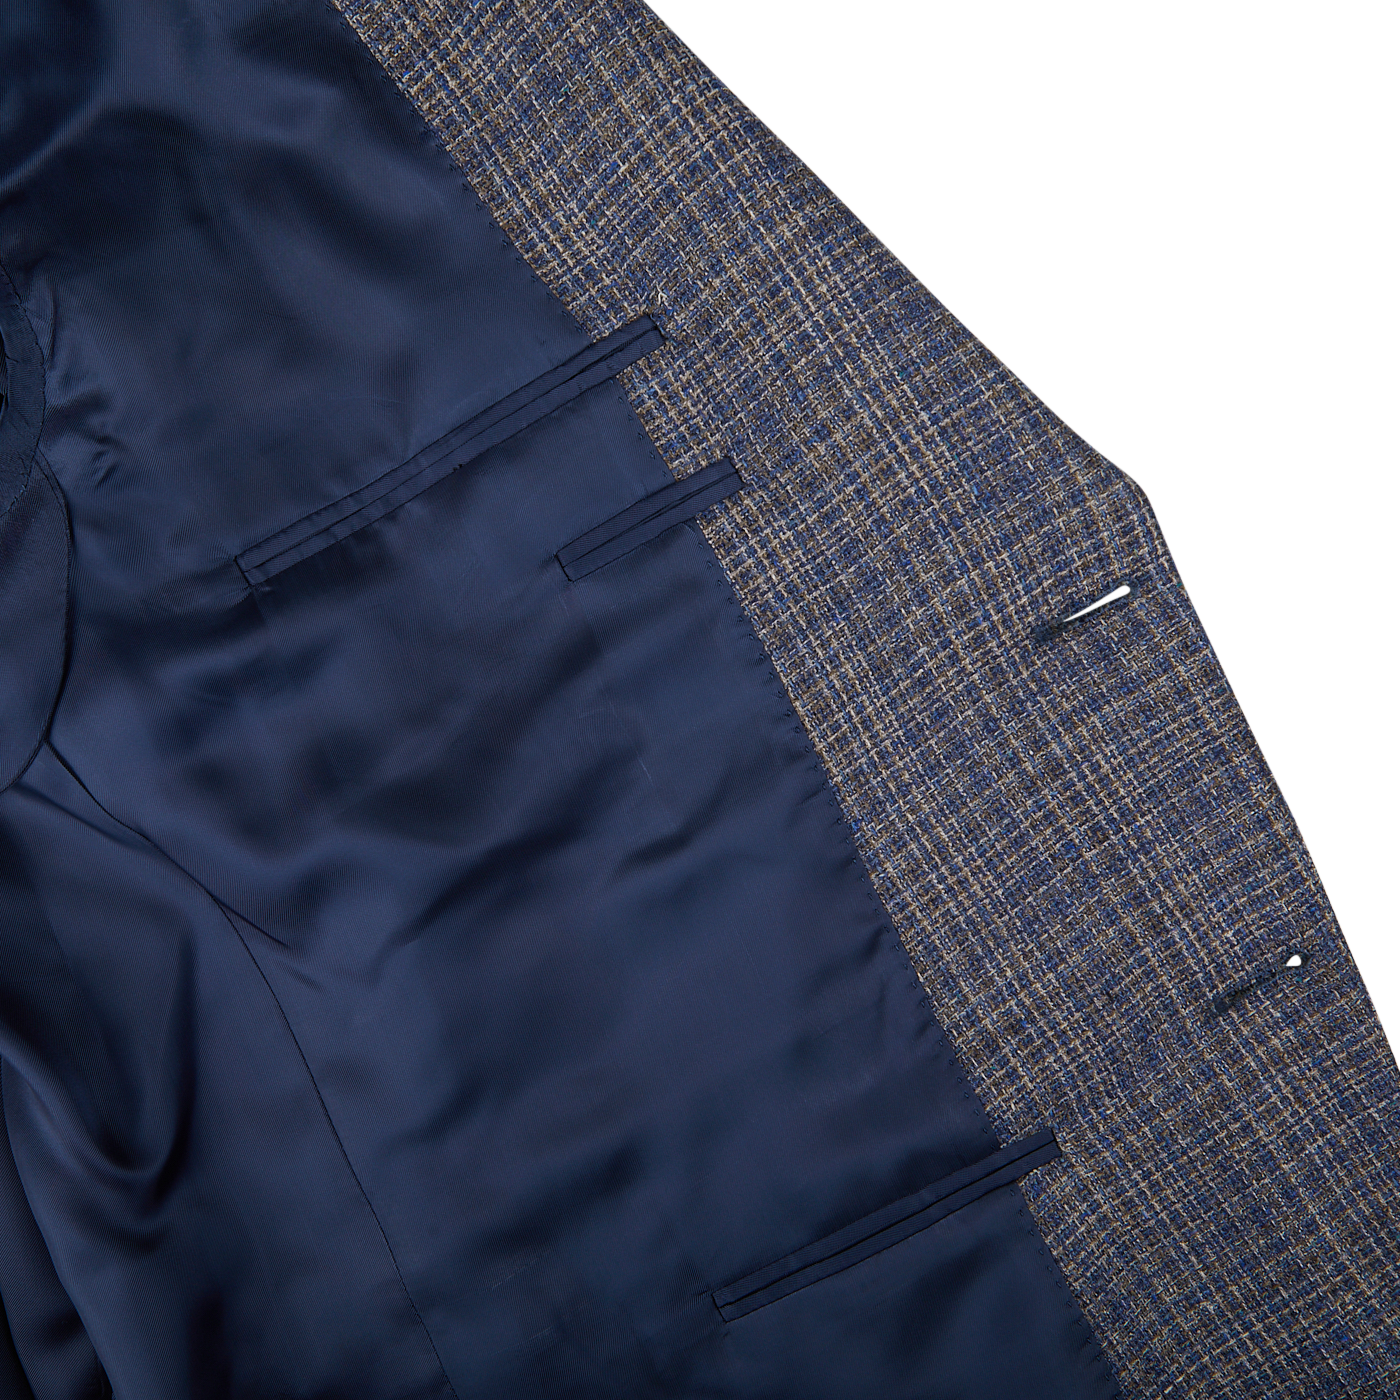 Close-up of a Canali Blue Melange Silk Wool Basketweave Blazer with one half in solid navy and the other in blue and yellow plaid, displayed on a flat surface.